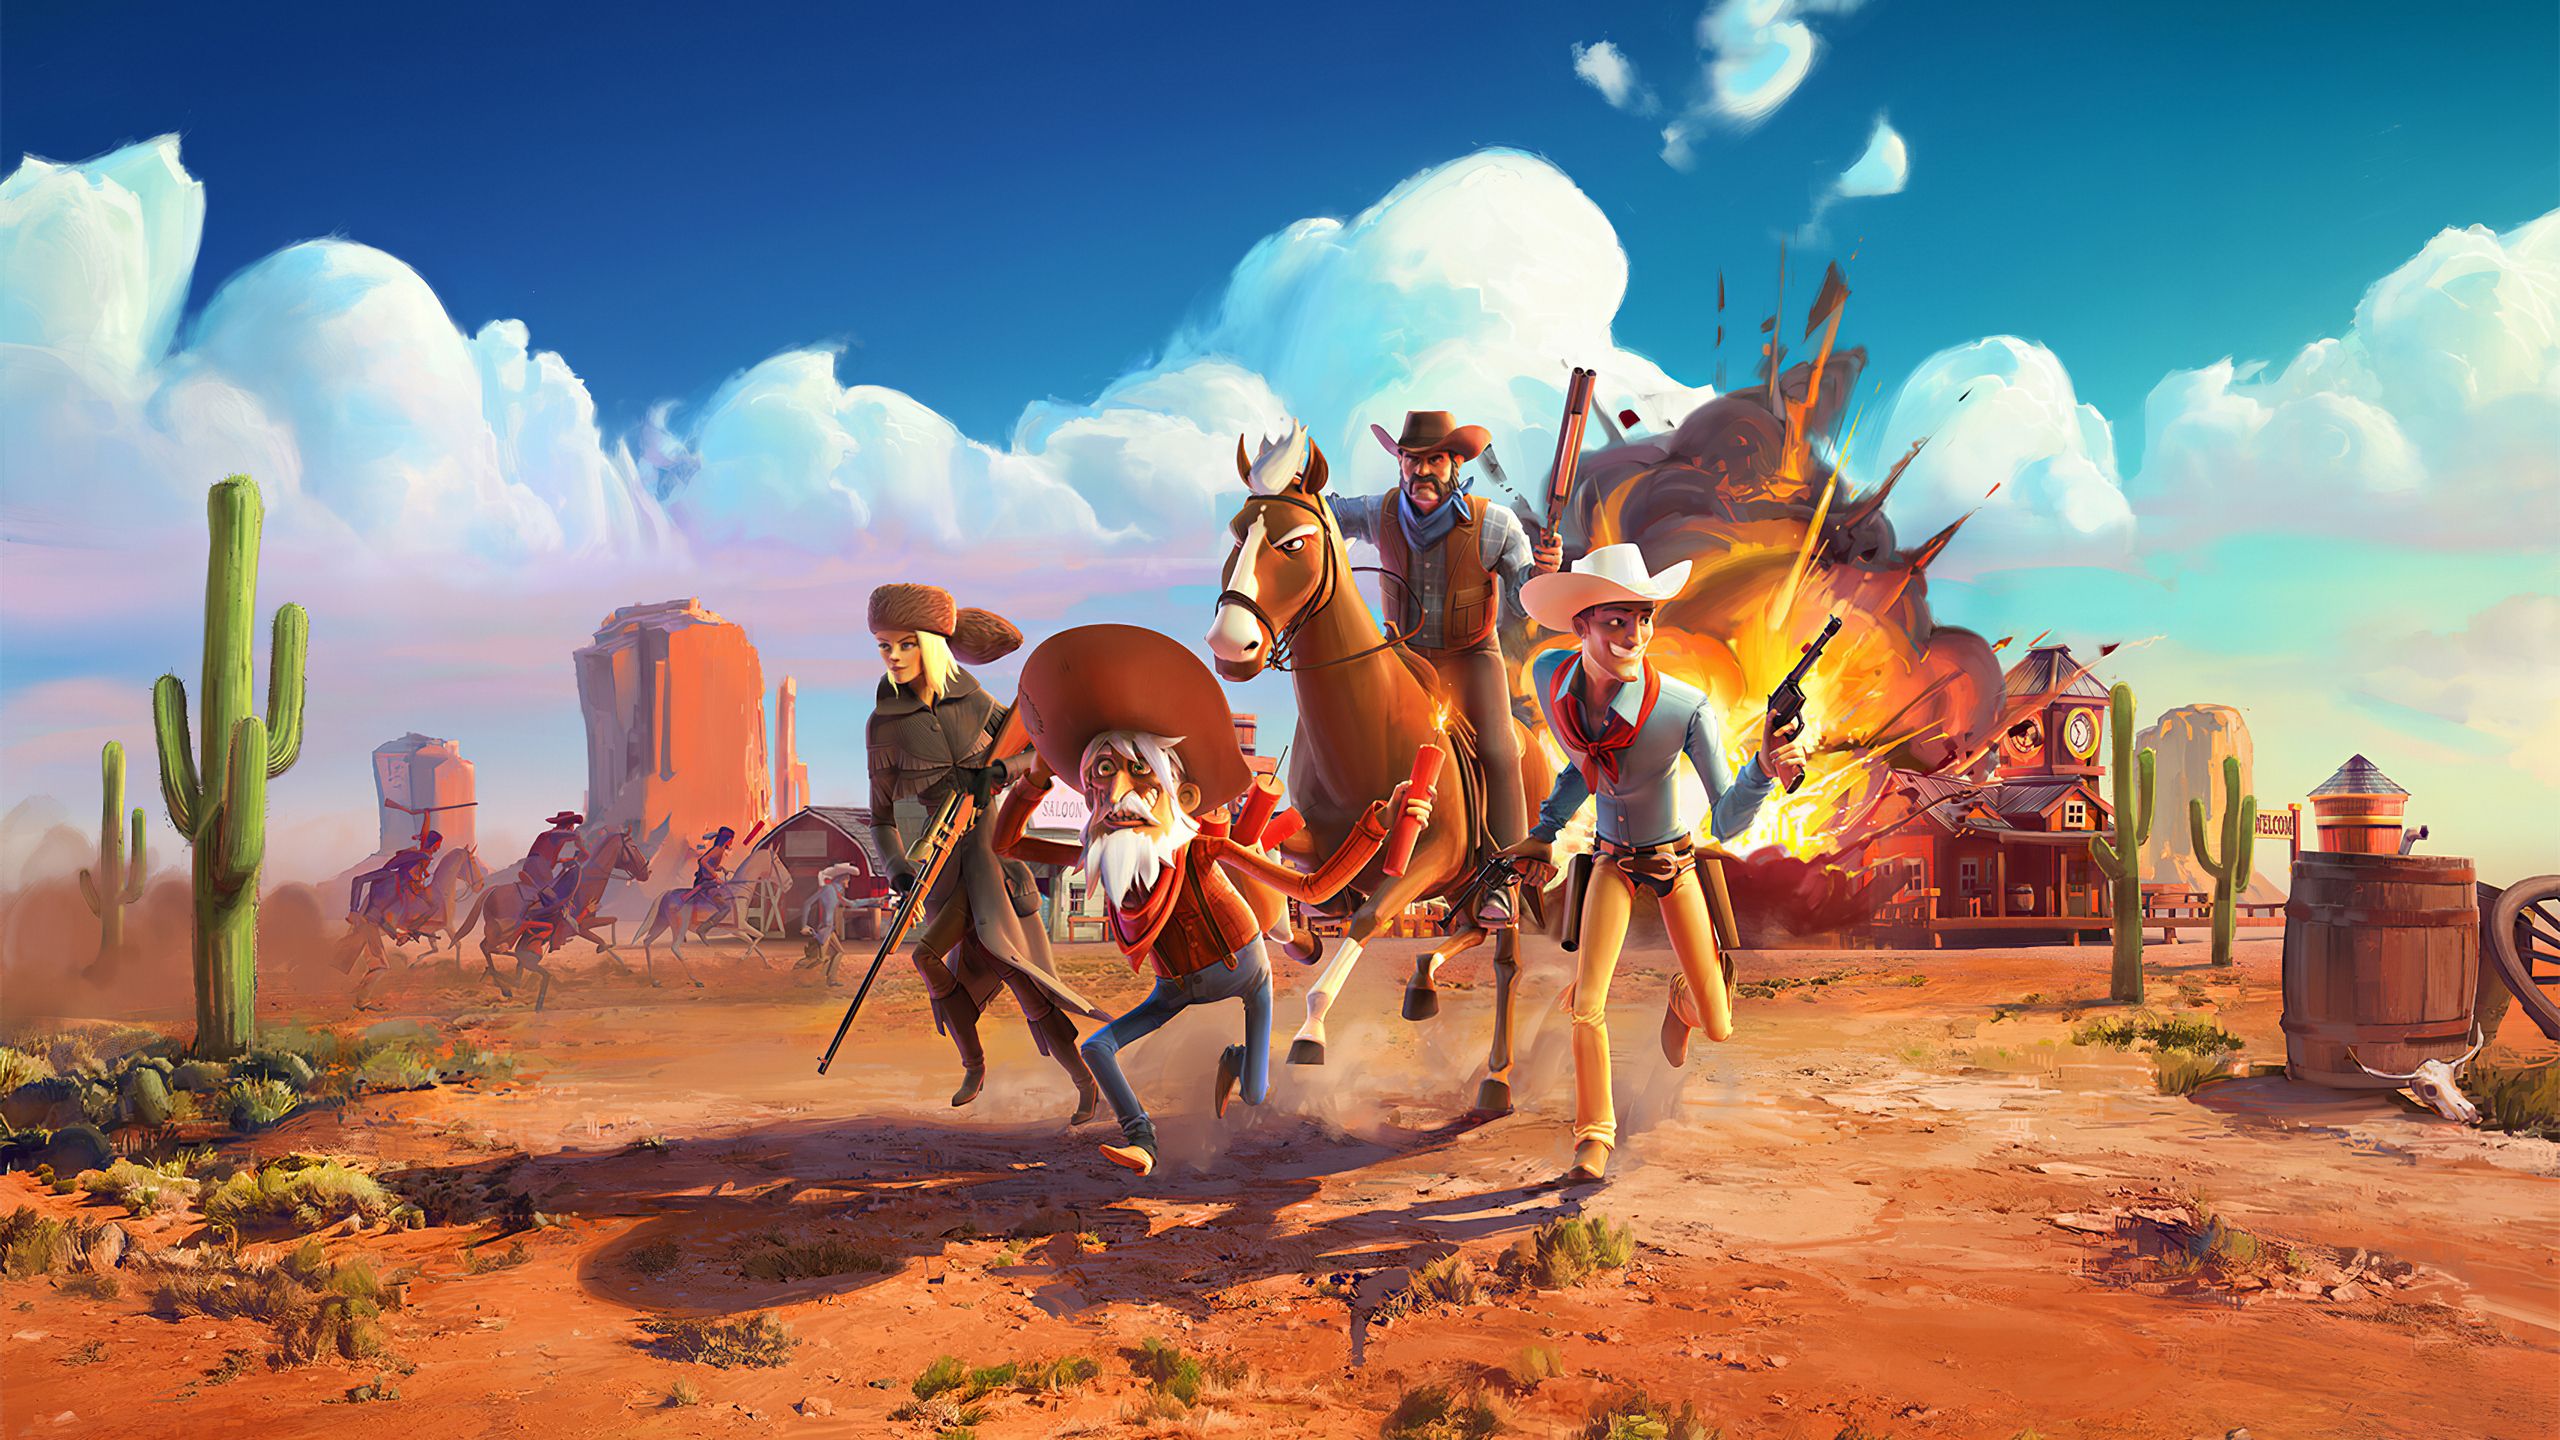 2560x1440 Wild West 4k 1440p Resolution Hd 4k Wallpaper Image Background Photo And Picture